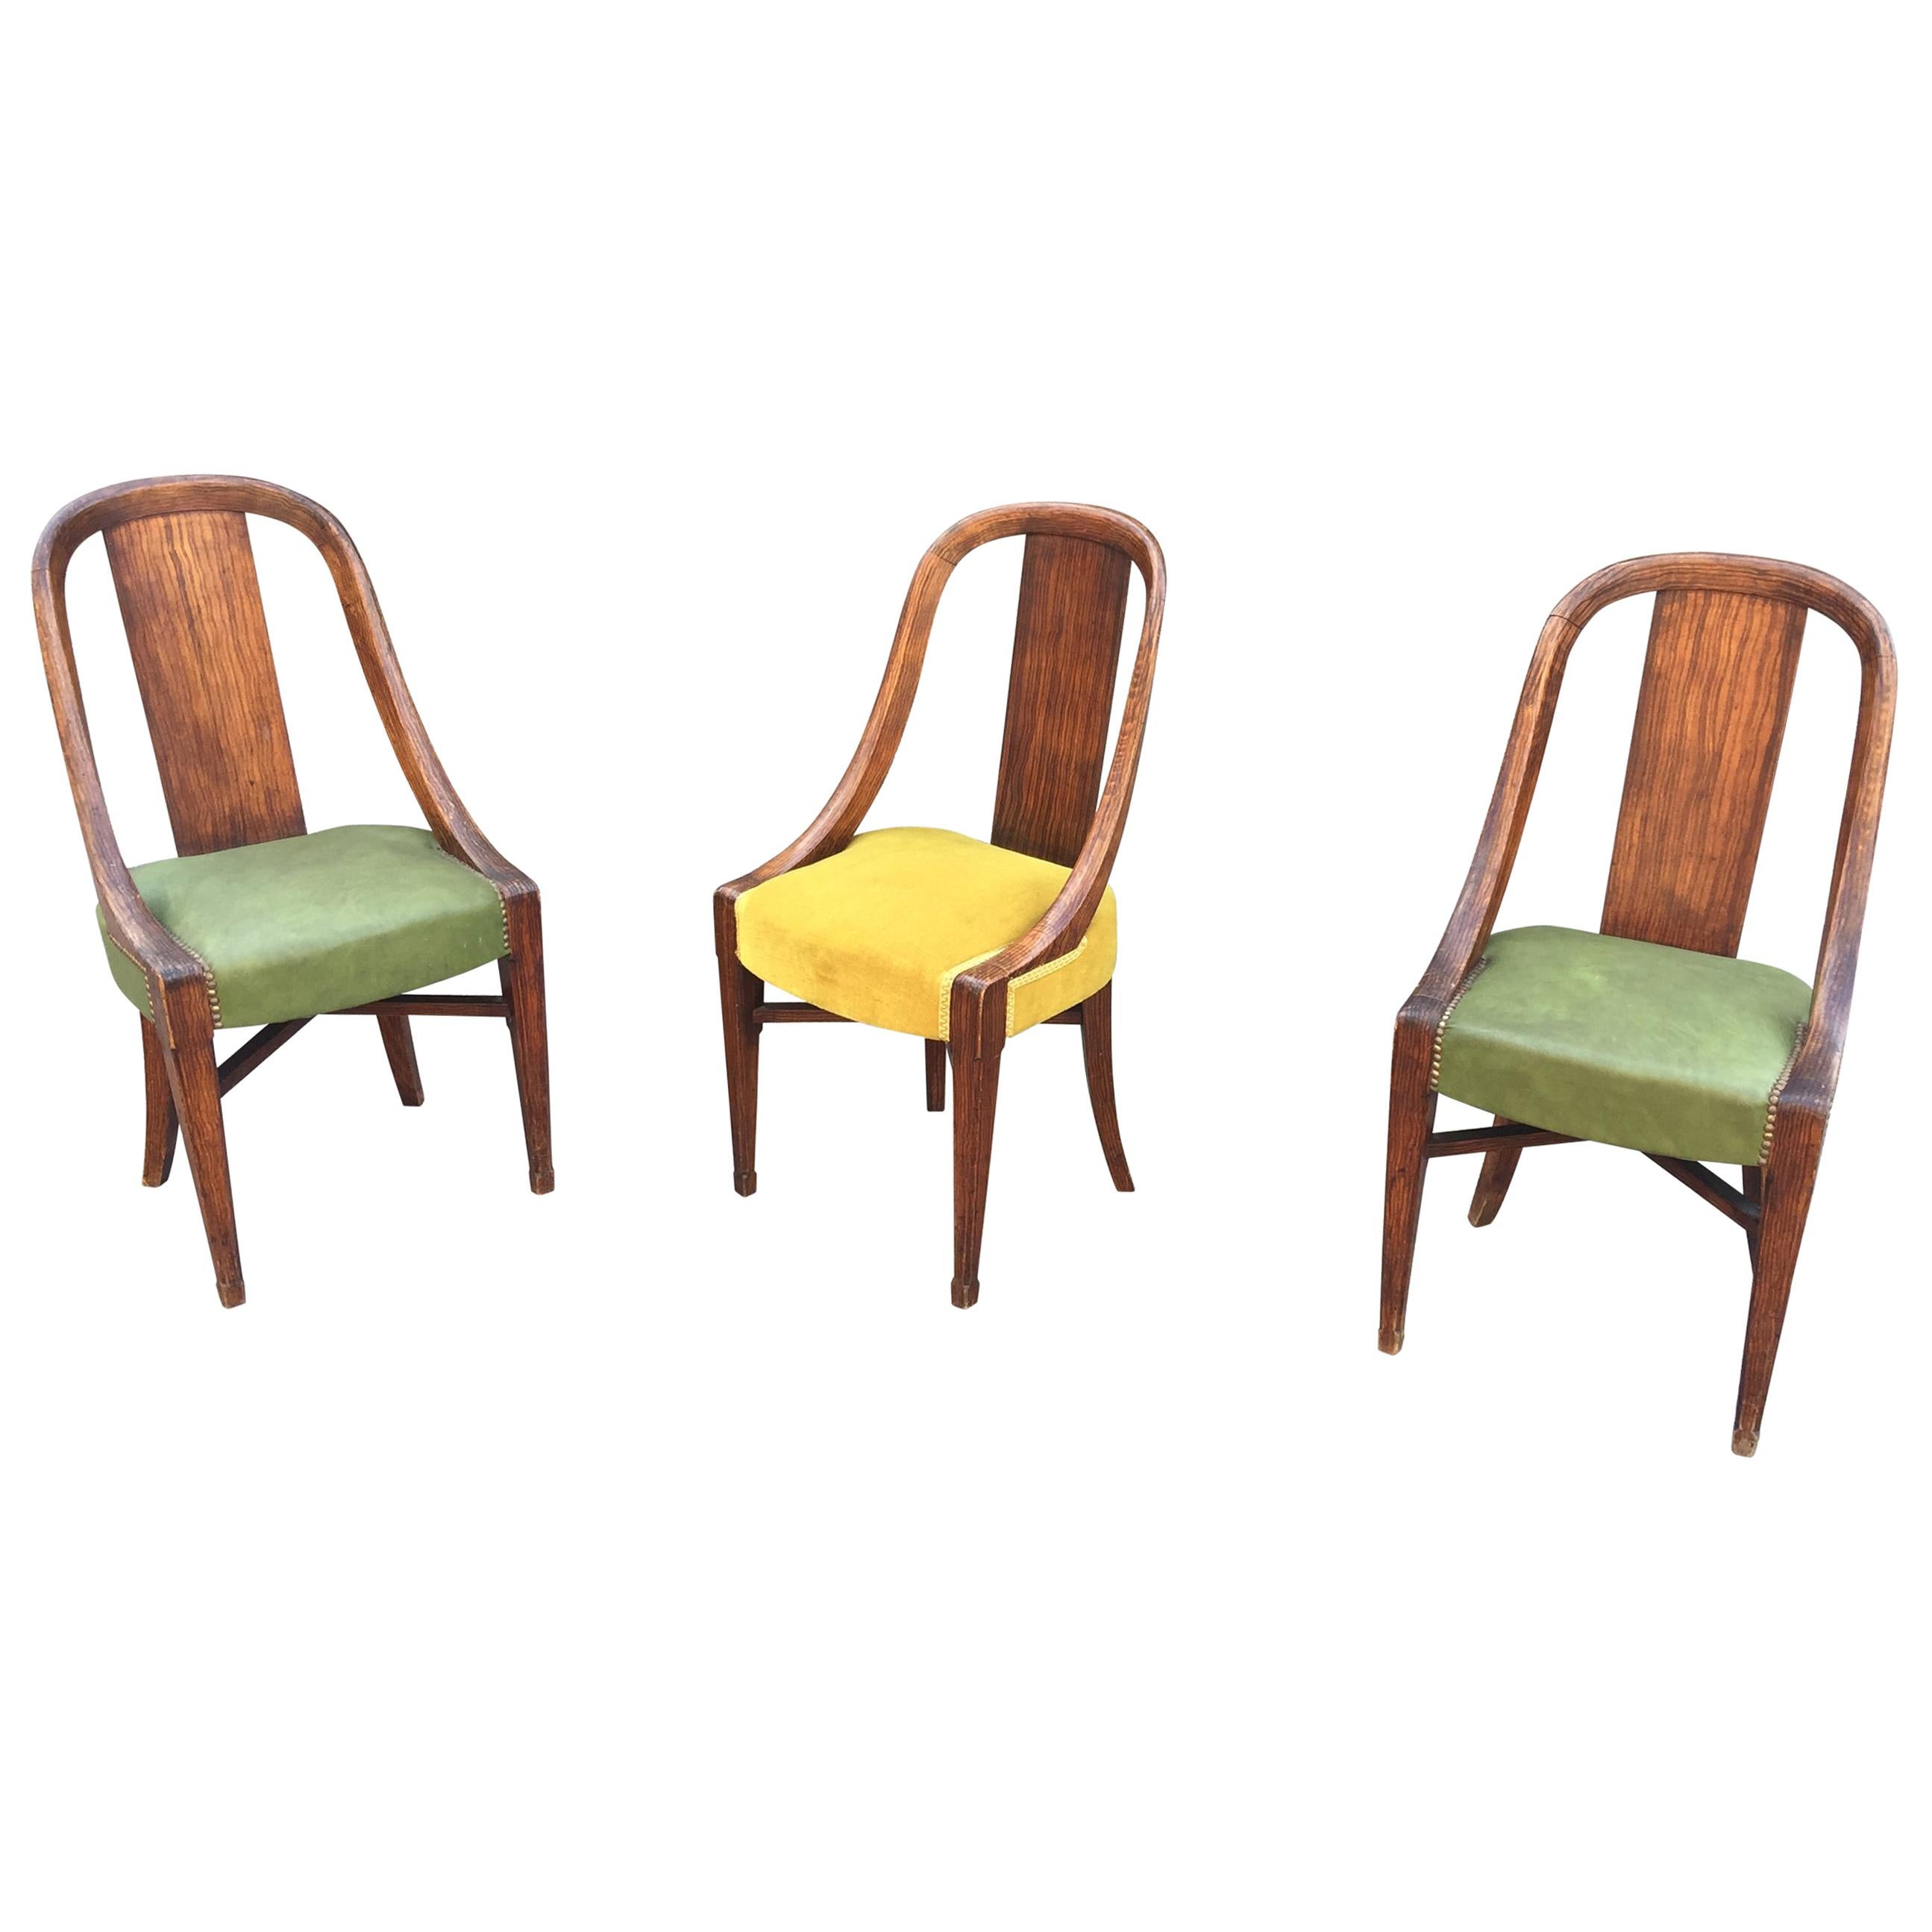 Three Art Deco Chairs, in Wood Painted Faux Wood Decor, circa 1925